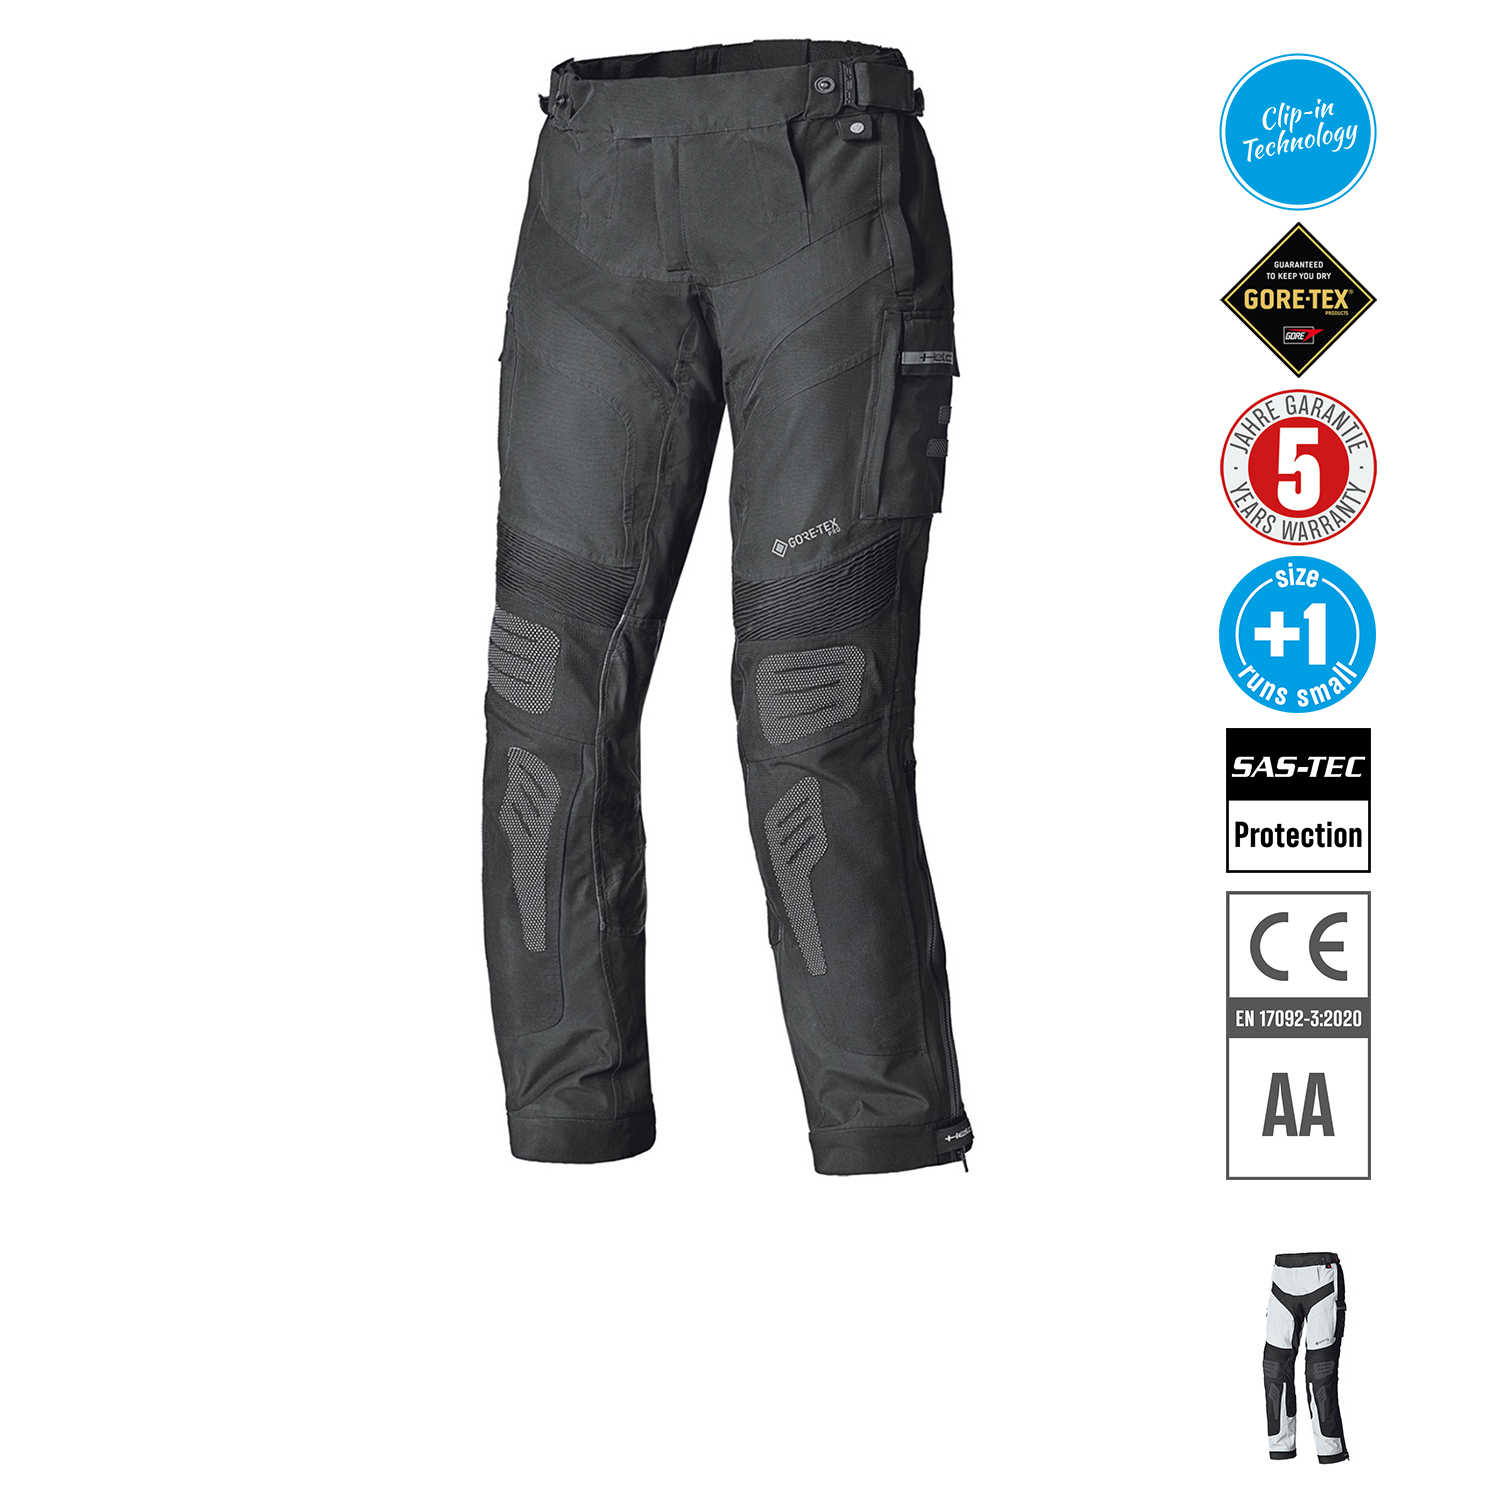 Held Atacama Pants - Available in Various Colours